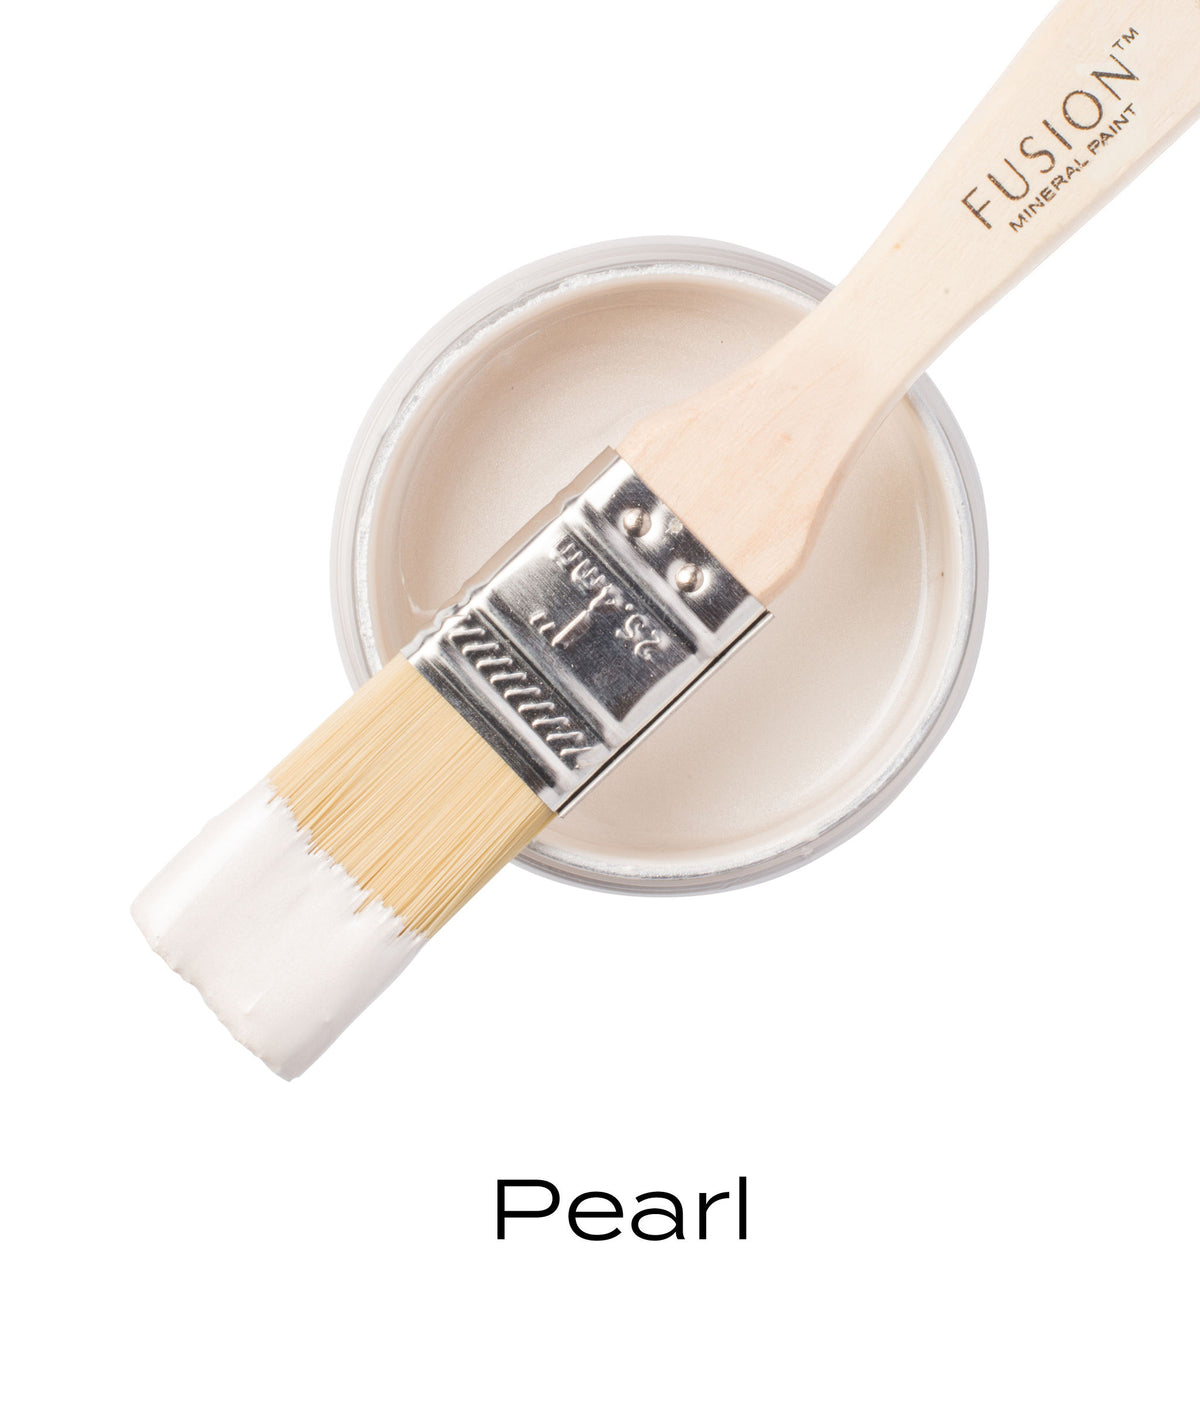 Pearl Metallic-Fusion Mineral Paint